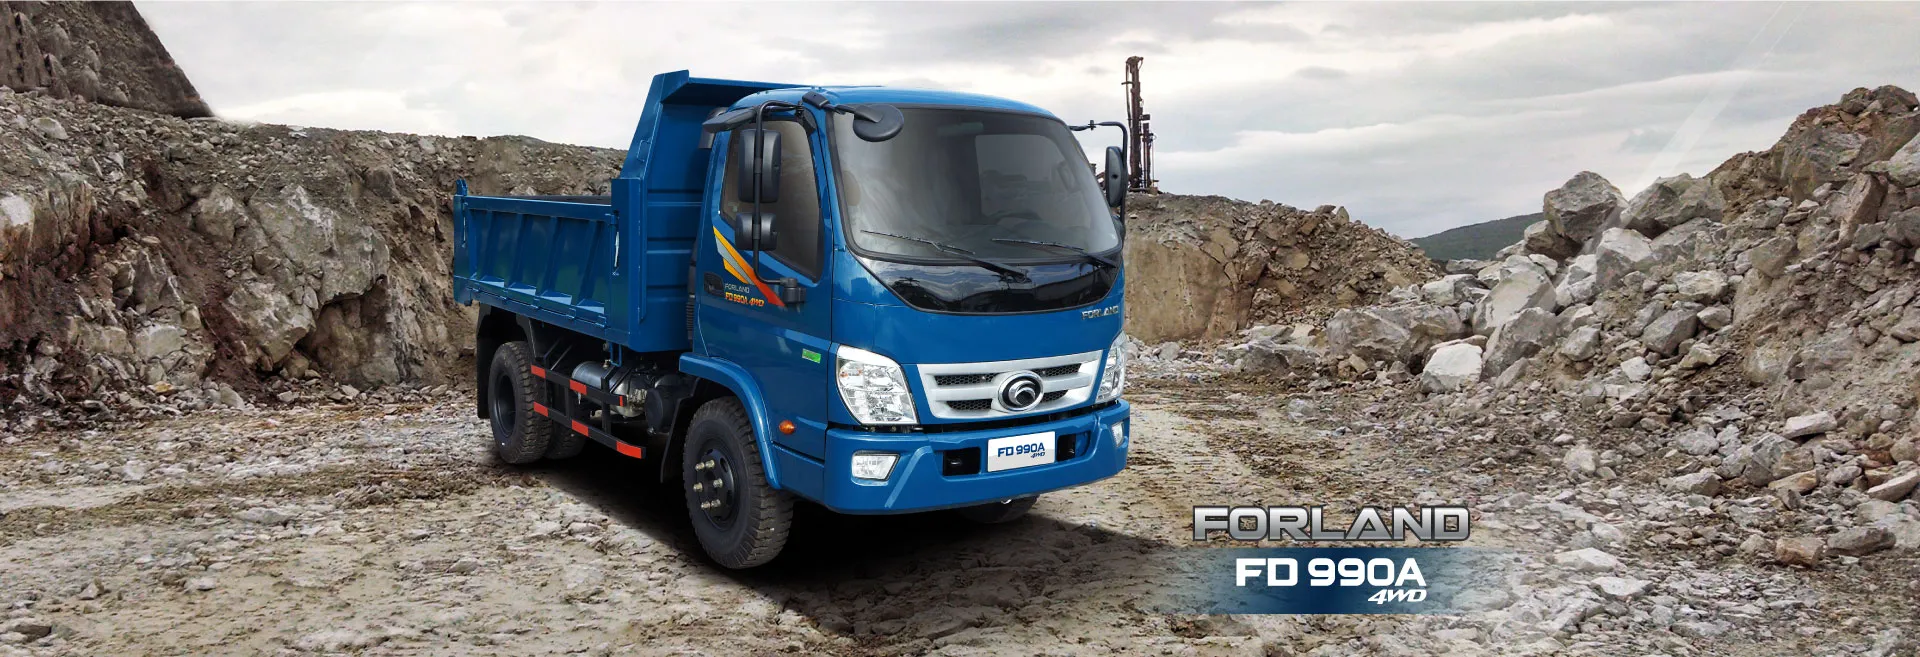 Forland FD990A - 4WD